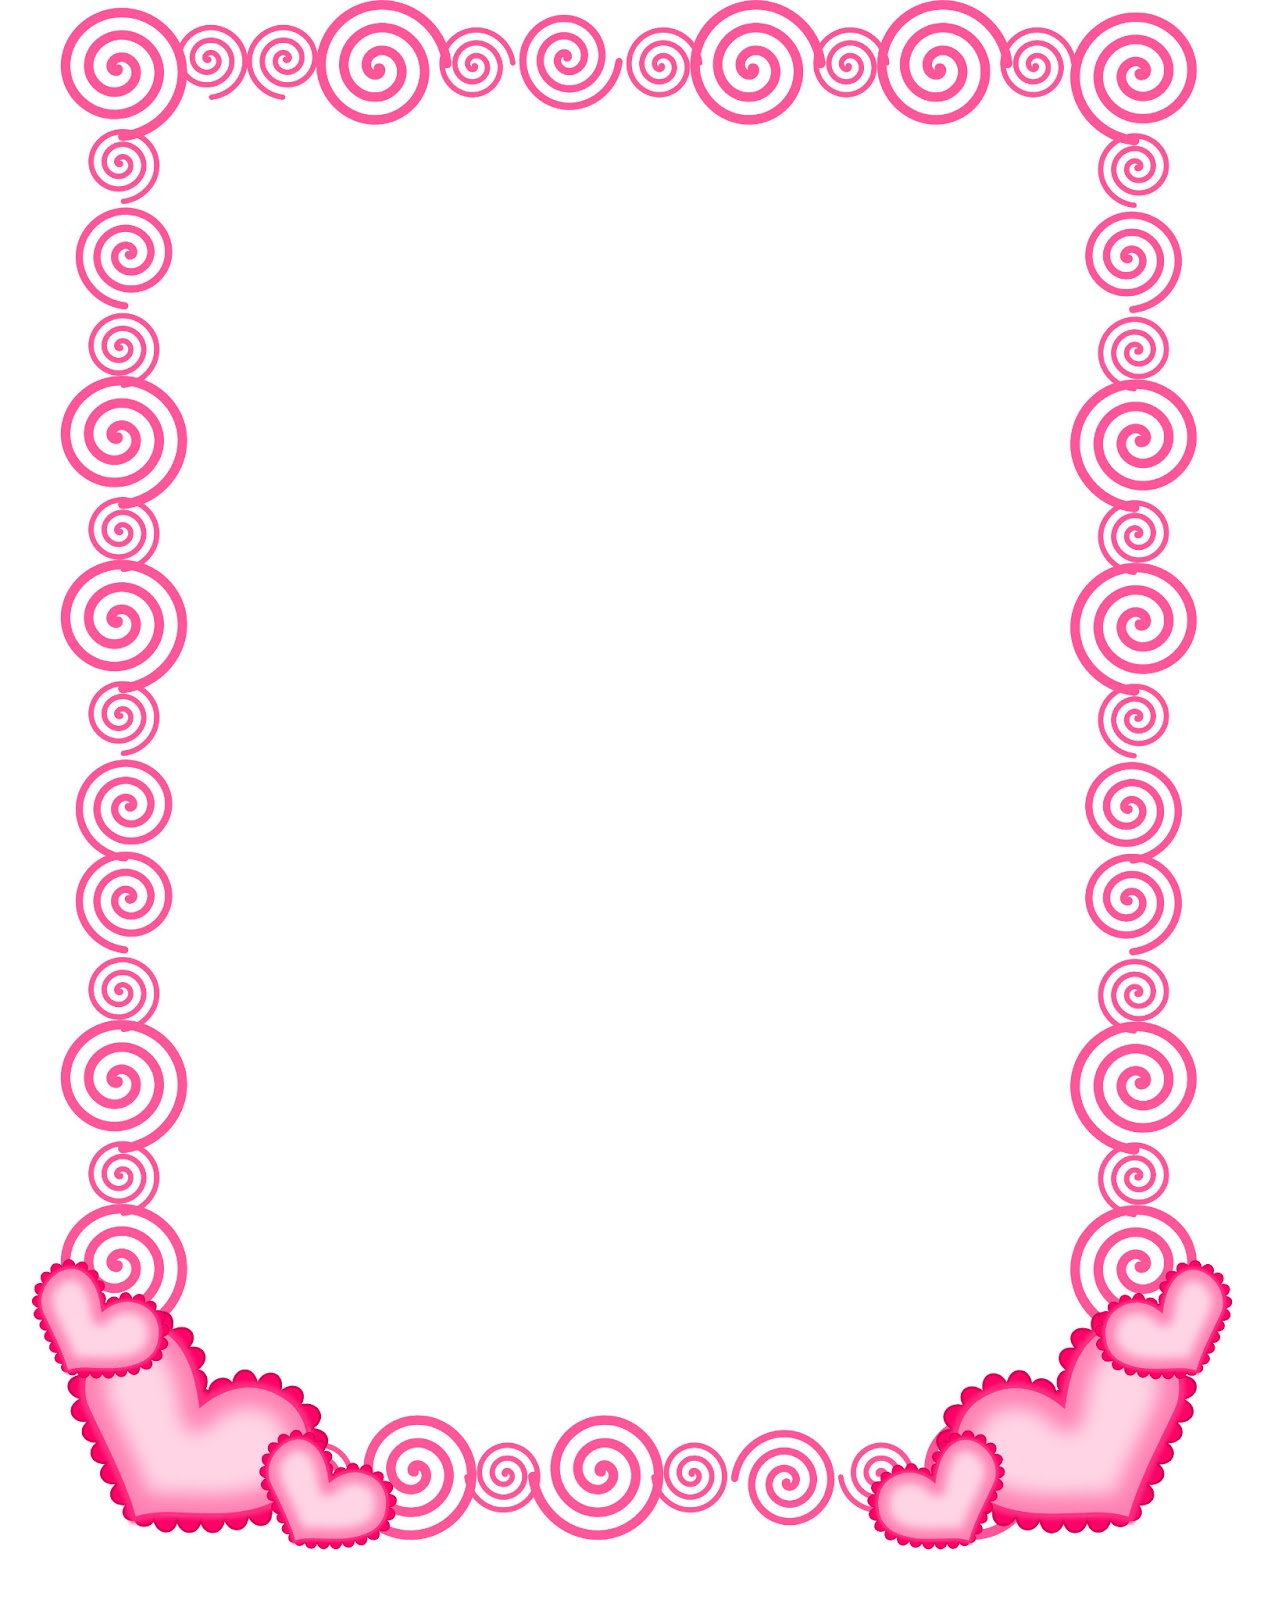     Border Clip Art Page Border And Vector Graphics Heart And Candy Border